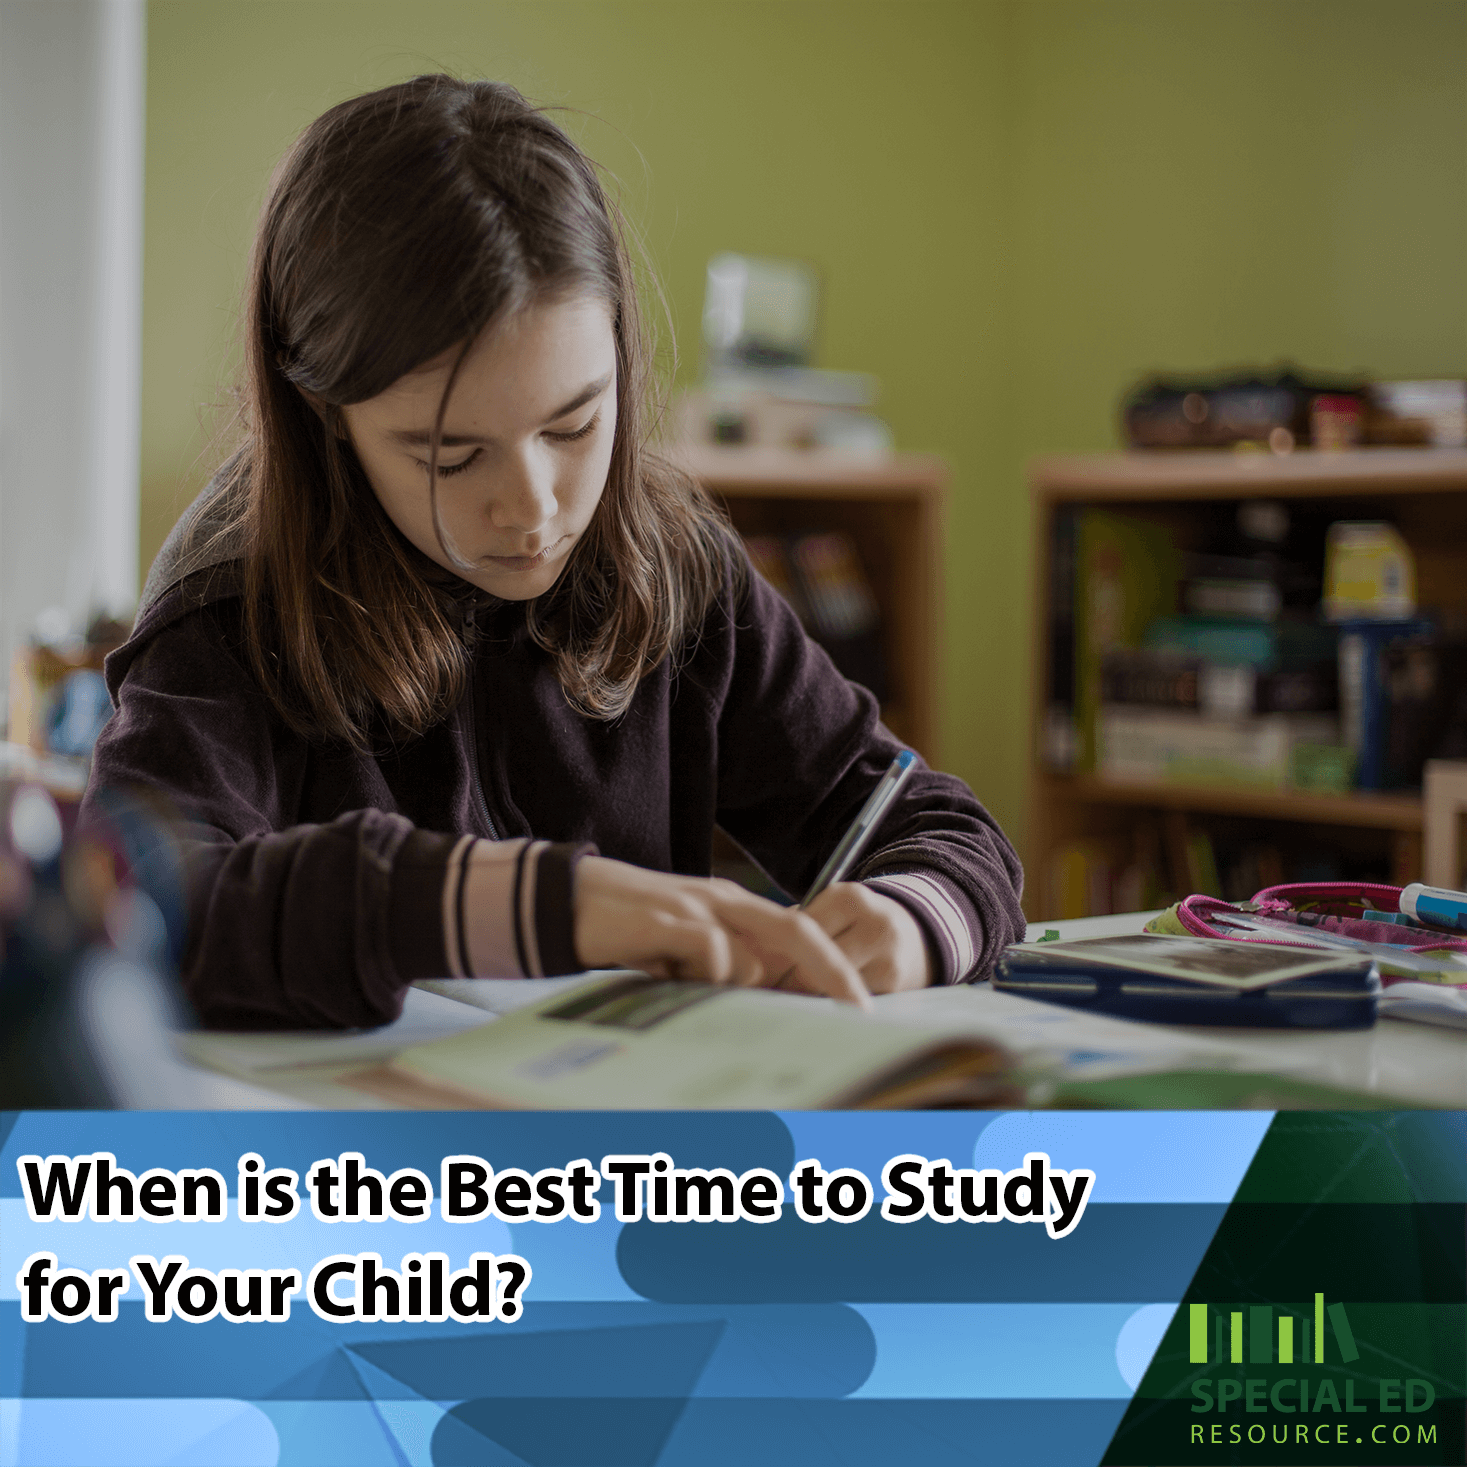 A young girl, seated at a desk in her bedroom, is focused on her homework, writing in a notebook. The image includes text at the bottom asking, "When is the Best Time to Study for Your Child?" and a logo for special ed resource.